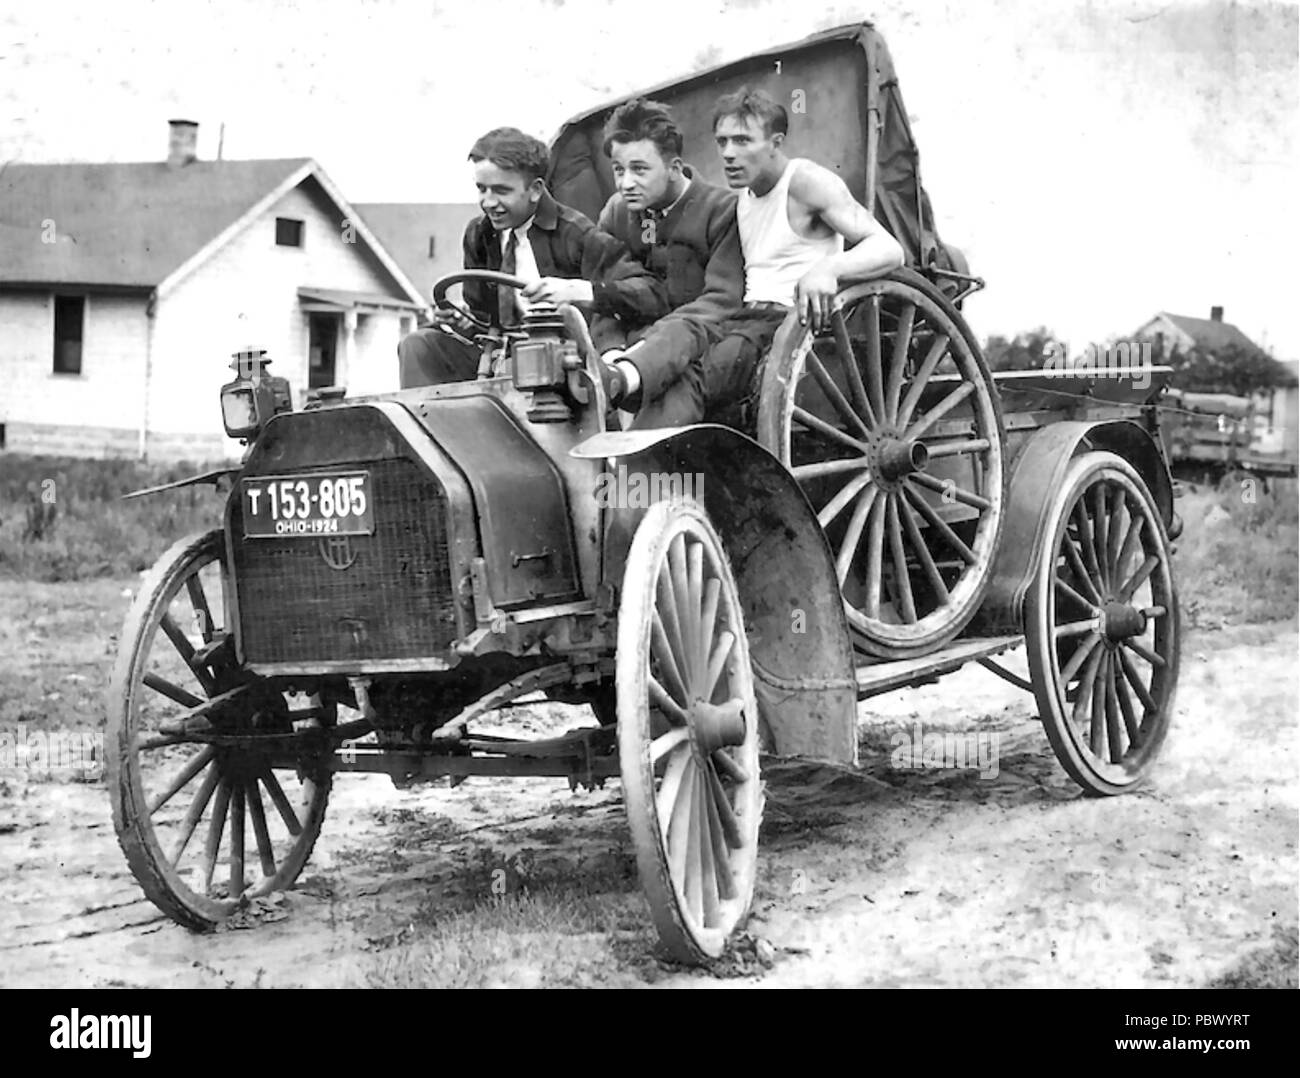 AMERICAN CAR about 1910 with hopeful riders Stock Photo